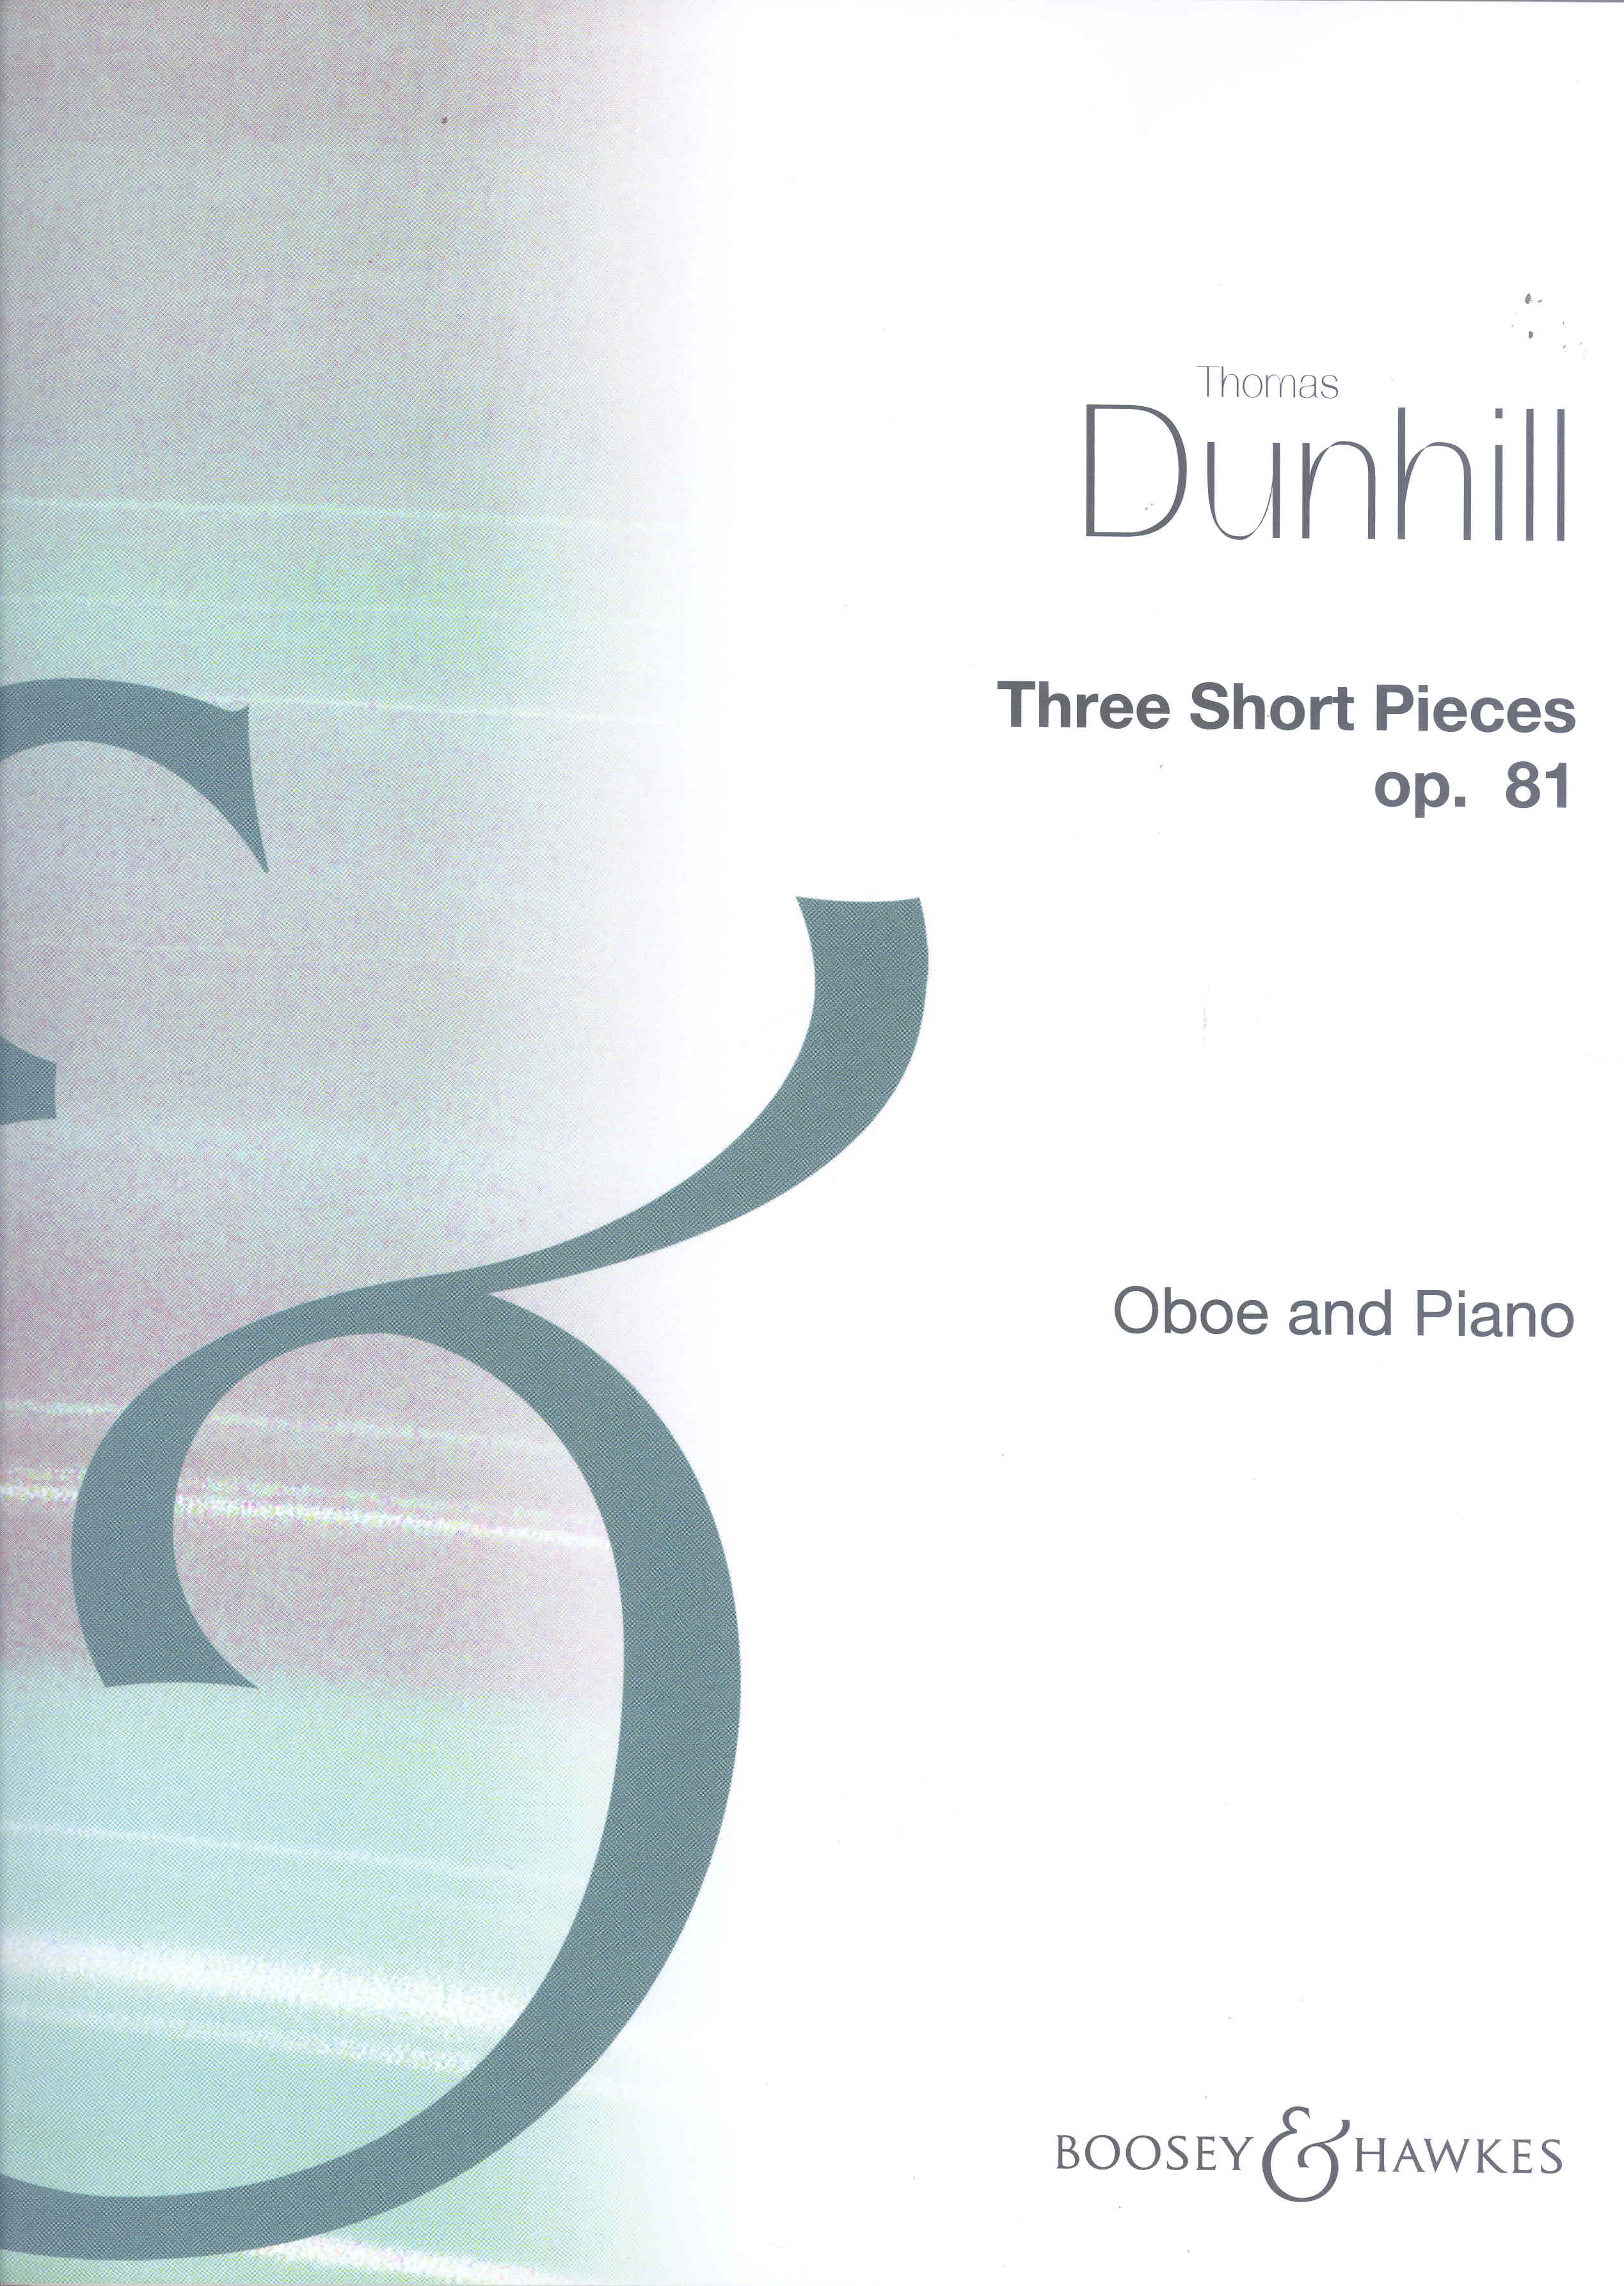 Dunhill 3 Short Pieces Op81 Oboe & Piano Sheet Music Songbook